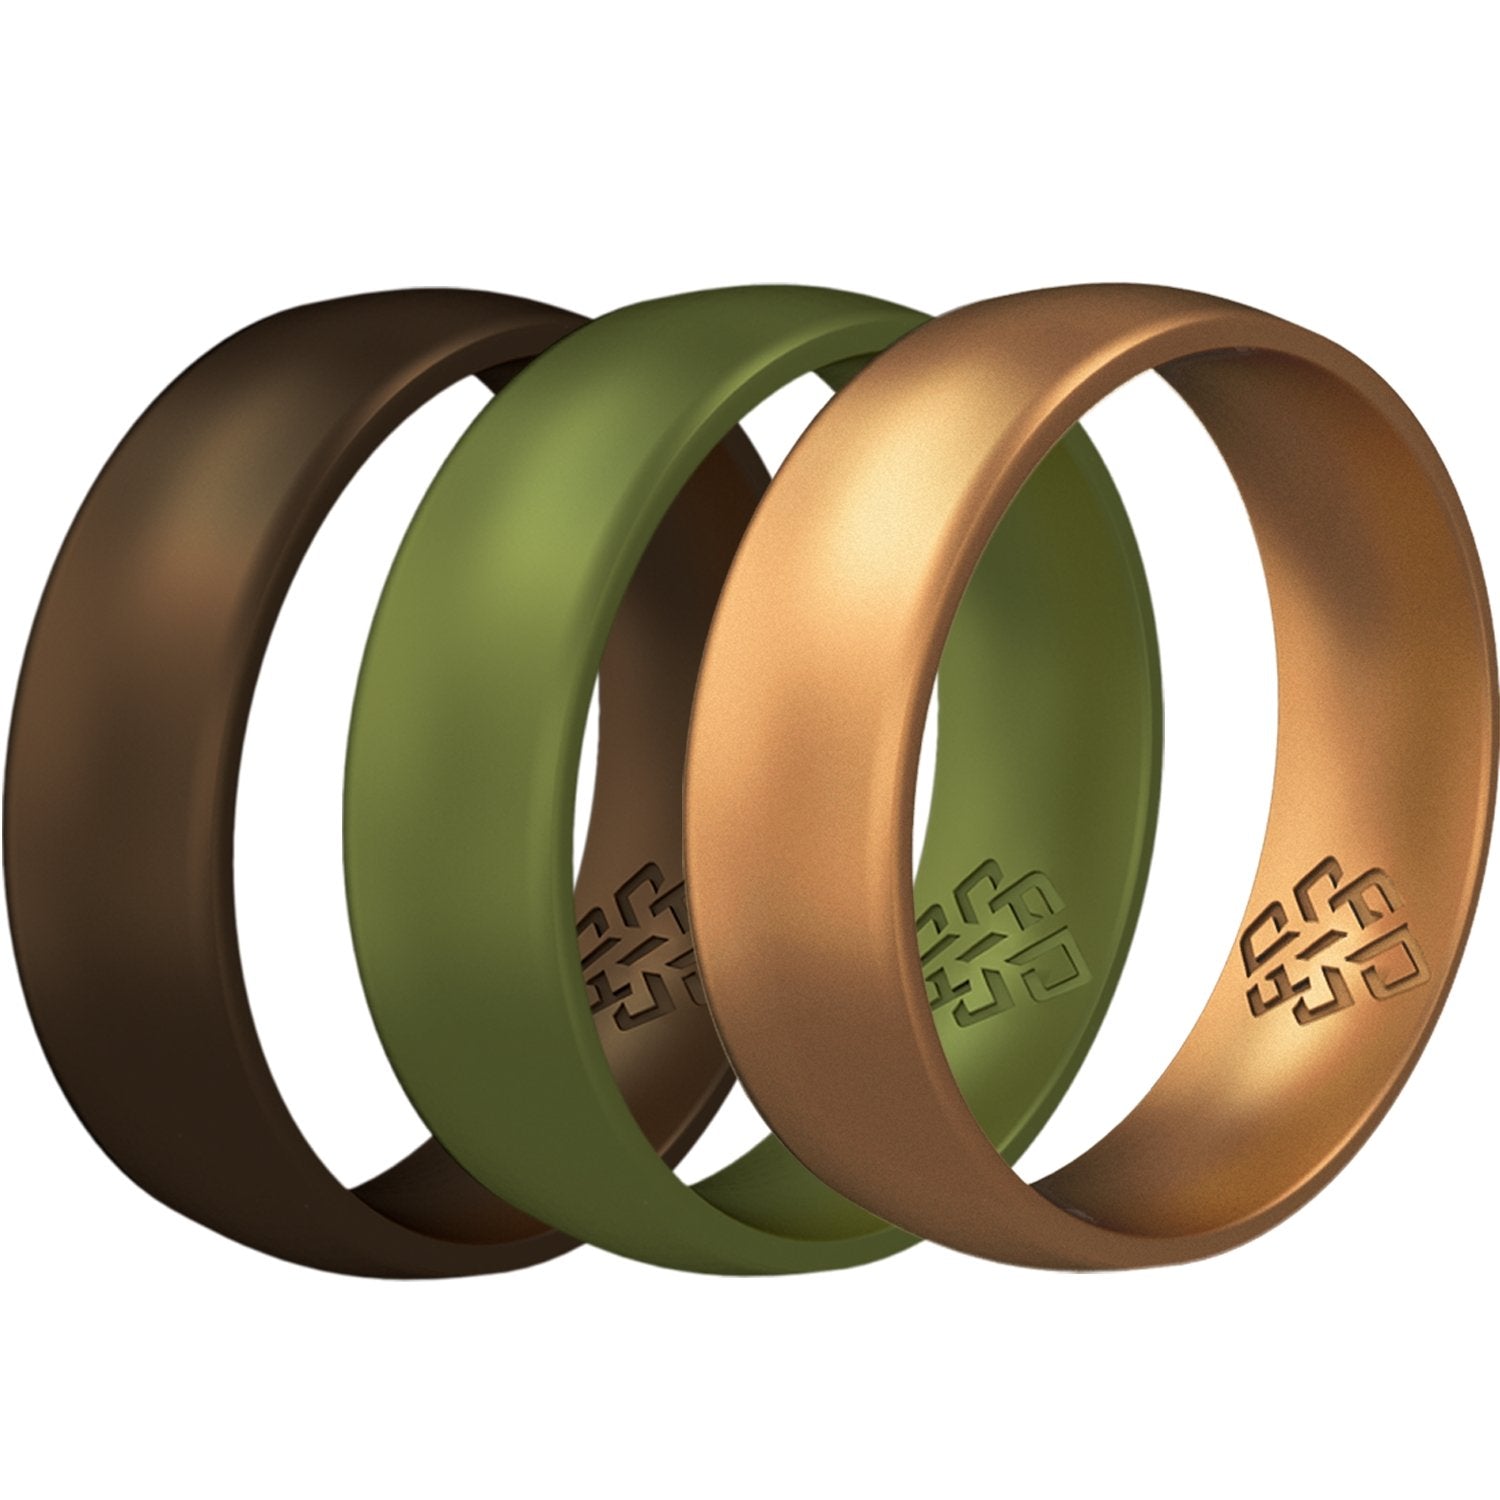 Woodland 3-Pack Breathable Silicone Ring For Men - Knot Theory